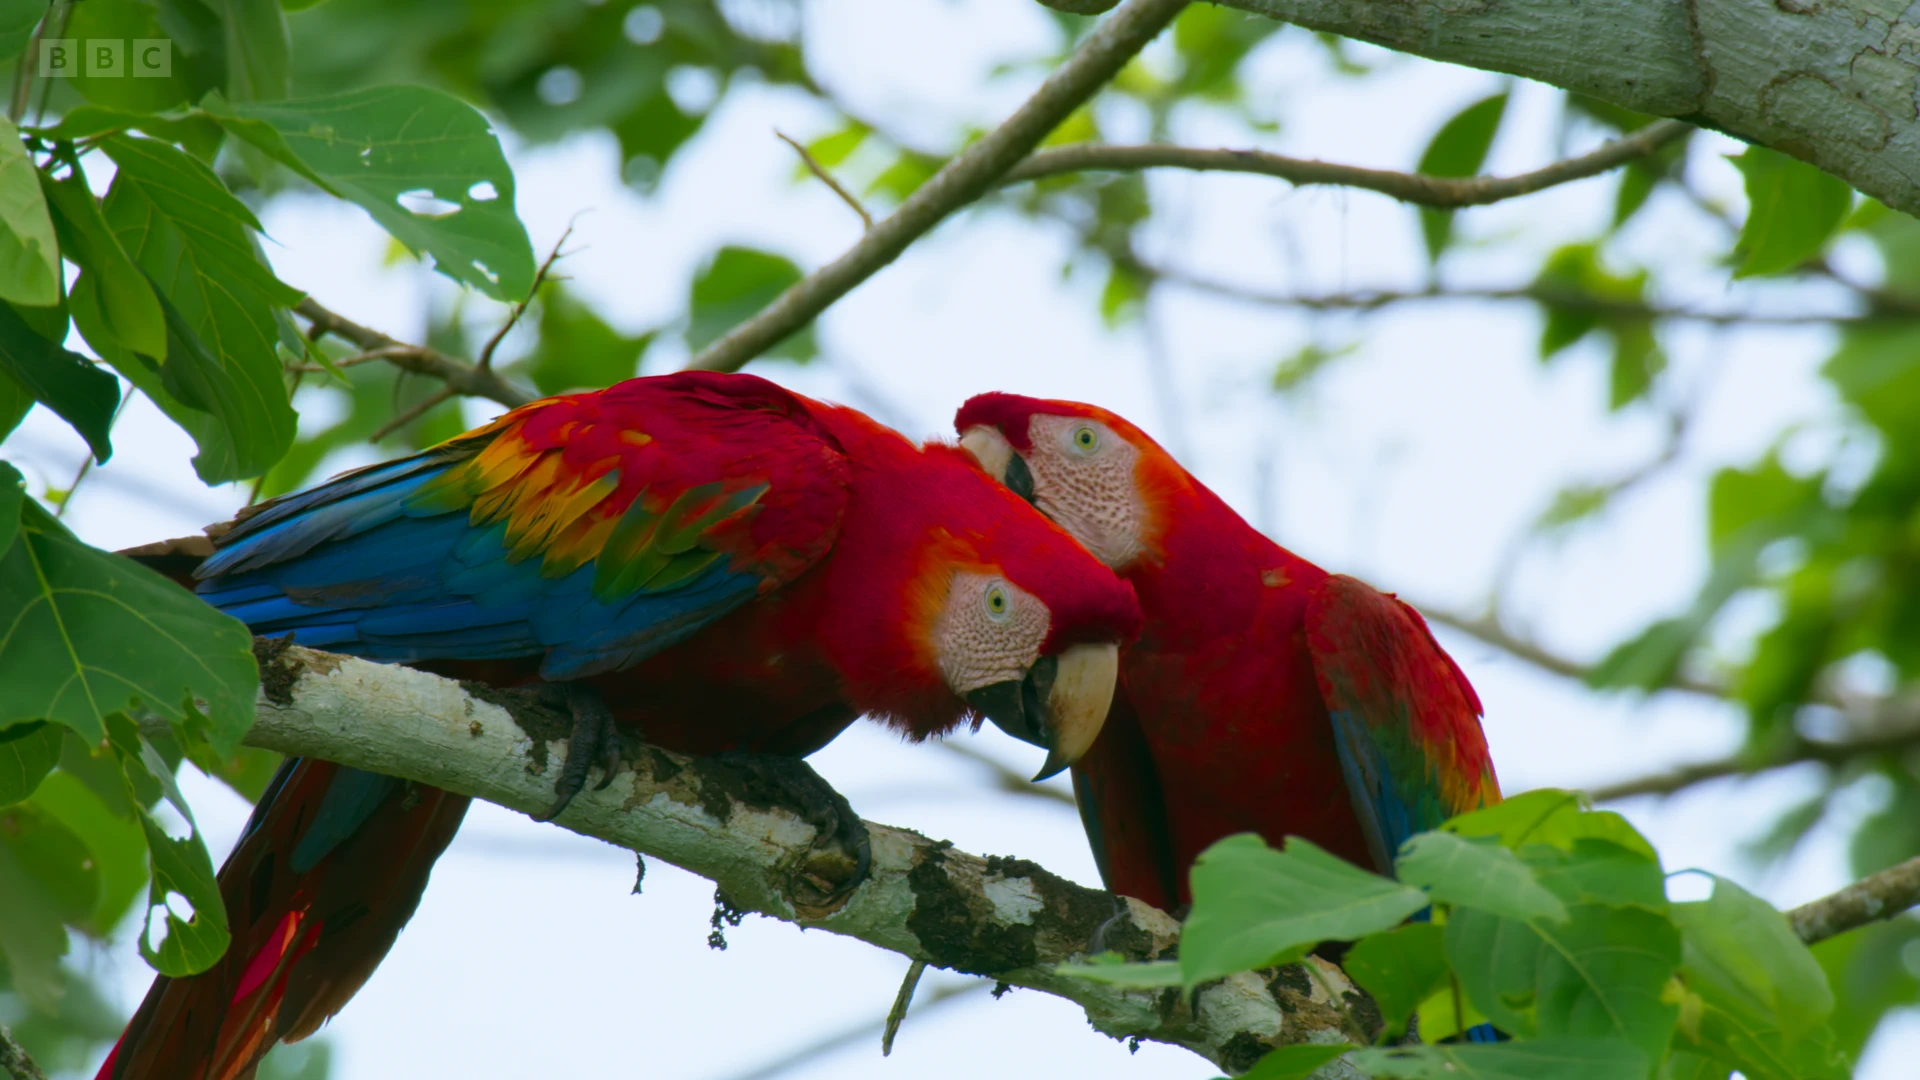 South American scarlet macaw (Ara macao macao) as shown in Seven Worlds, One Planet - South America